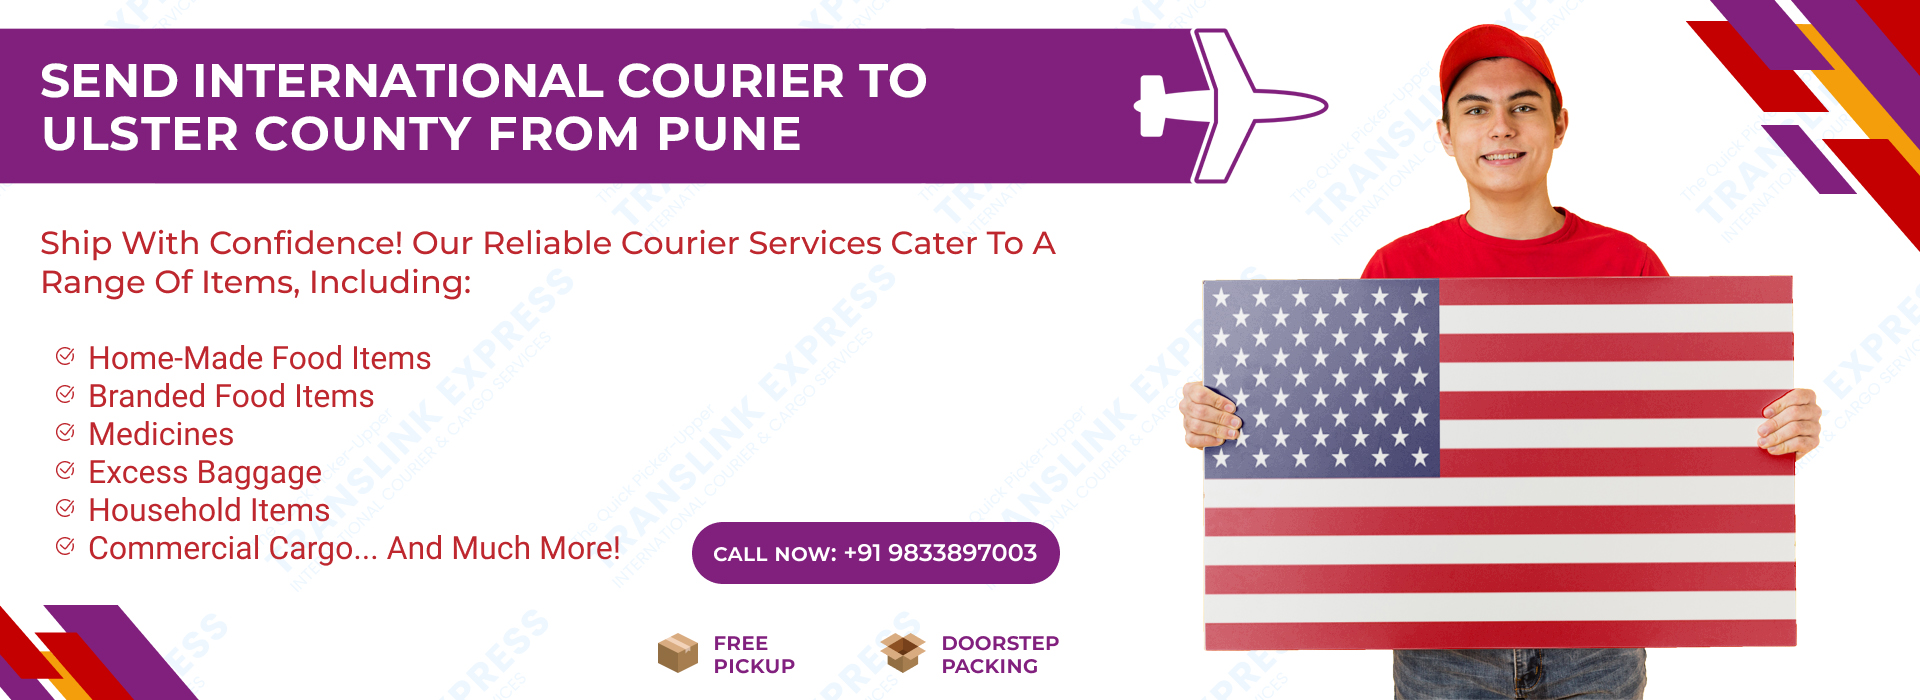 Courier to Ulster County From Pune